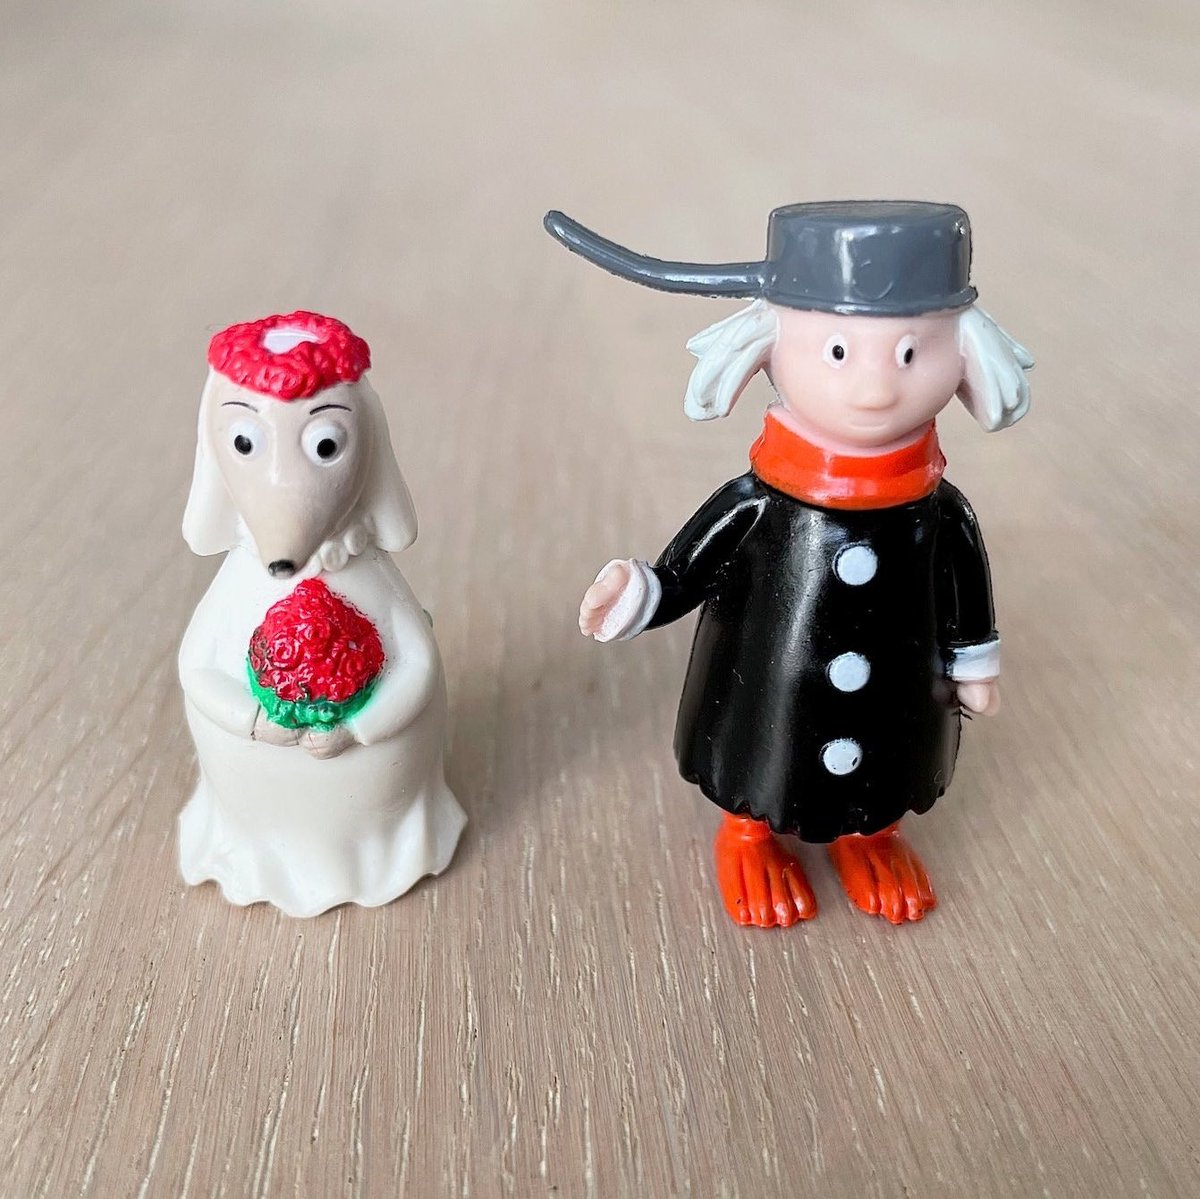 The Muddler and Fuzzy Moomin Figures, Moomin Characters by Tove Jansson, Finland

 #etsyshop #iammiafinland  #moominfigure #moomincharacters #vintagetoys #moomin #moomins#vintagefigurines #moominfangift #muddler #fuzzy #wedding #eeddinggift etsy.me/3TdPaa2